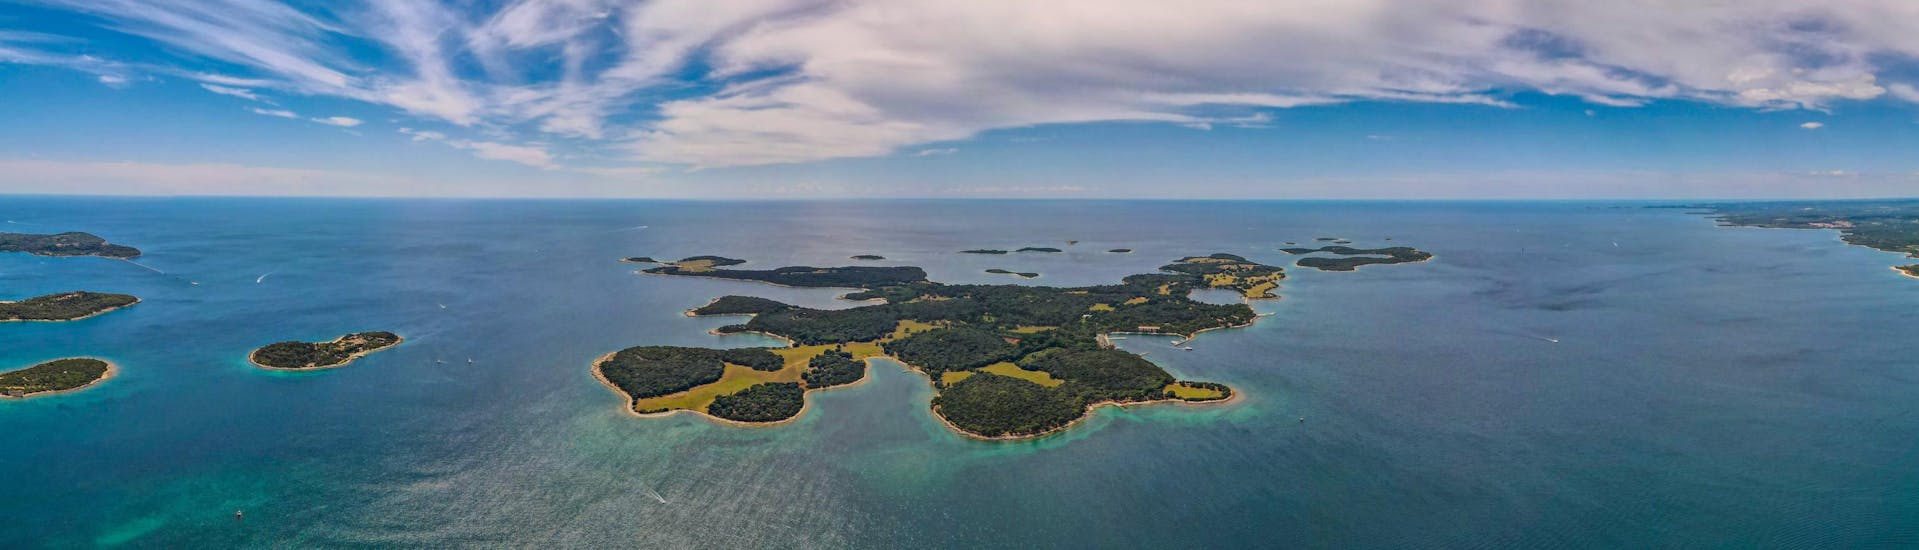 Panoramic view of Bijuni National Park, Istria, a popular destination for boat tours. 